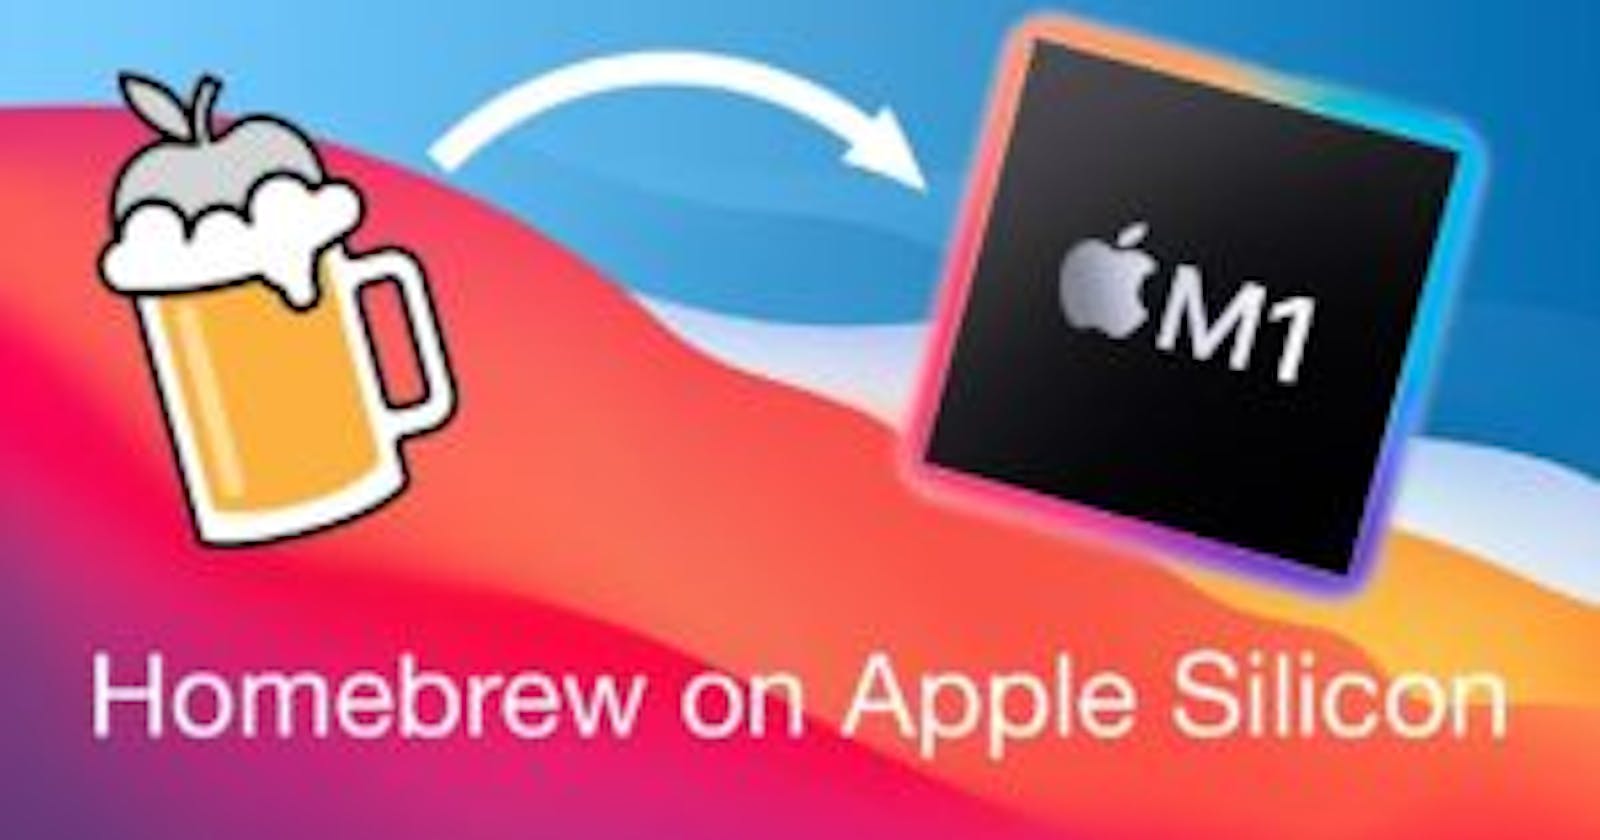 Installing Intel-based packages using Homebrew on the M1 Mac